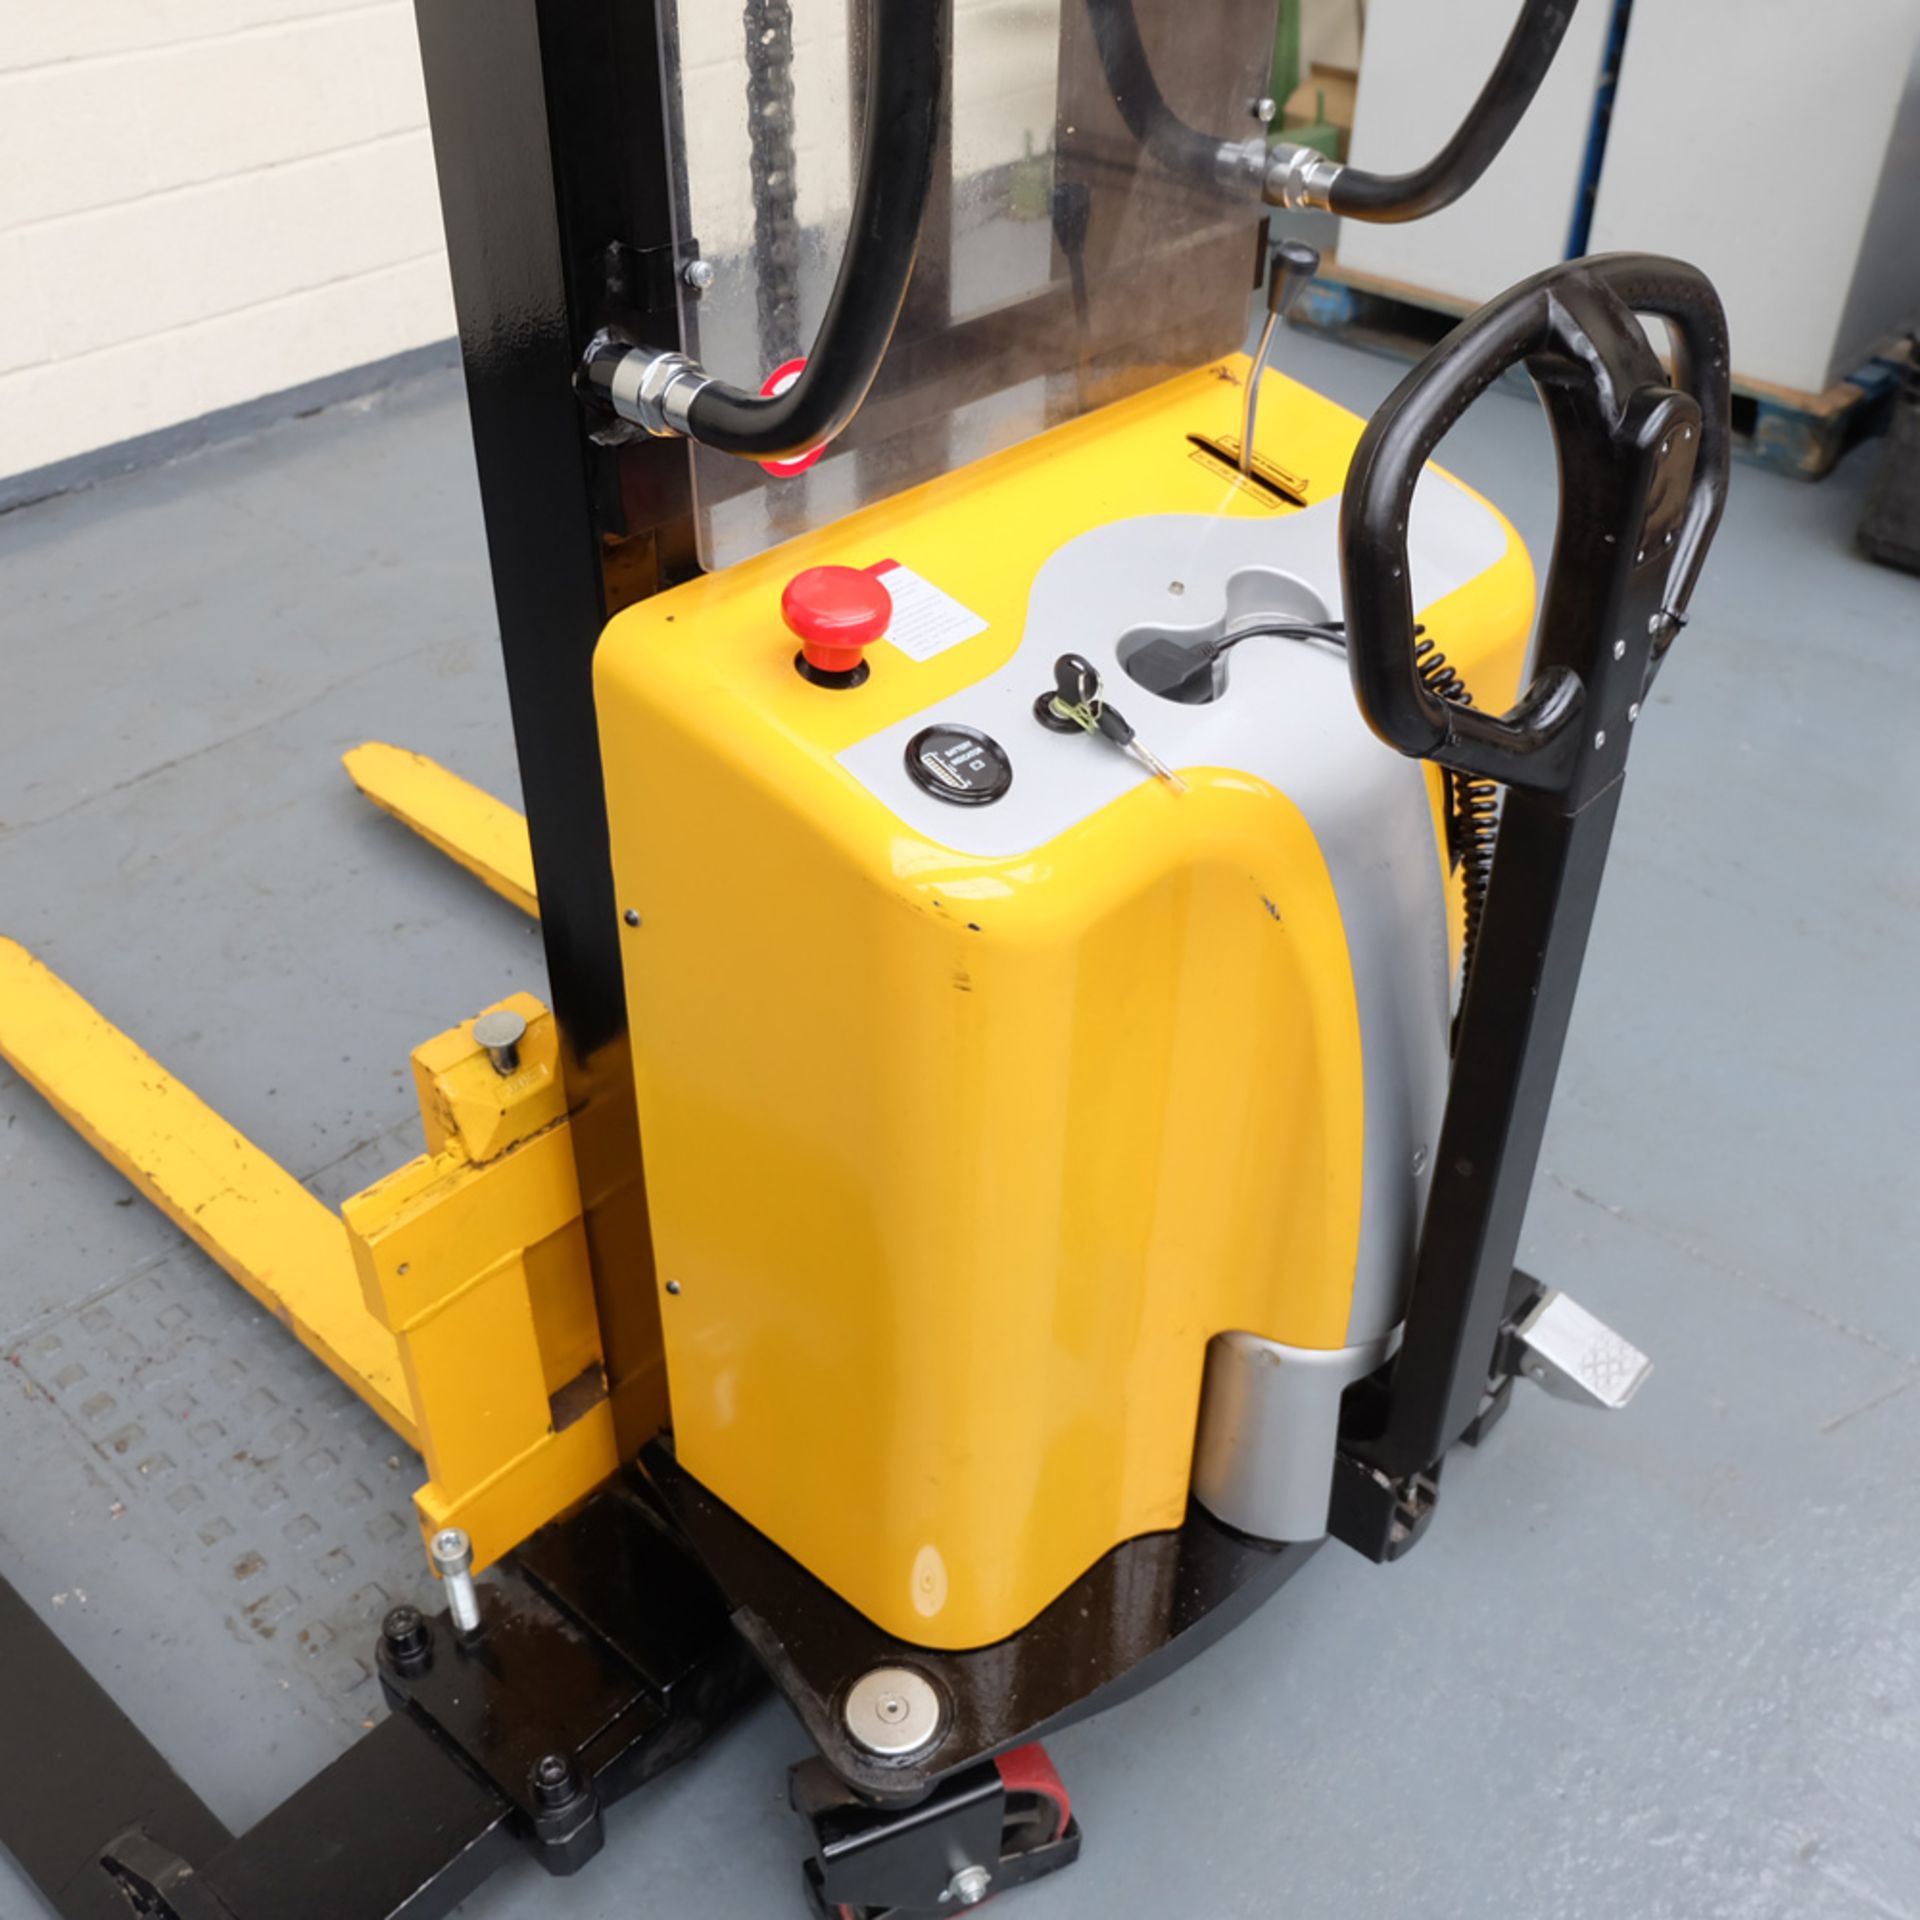 PTW Type Spmiow Pedestrian Hydraulic Pallet Lift Truck With ADJ Outriggers. - Image 11 of 12